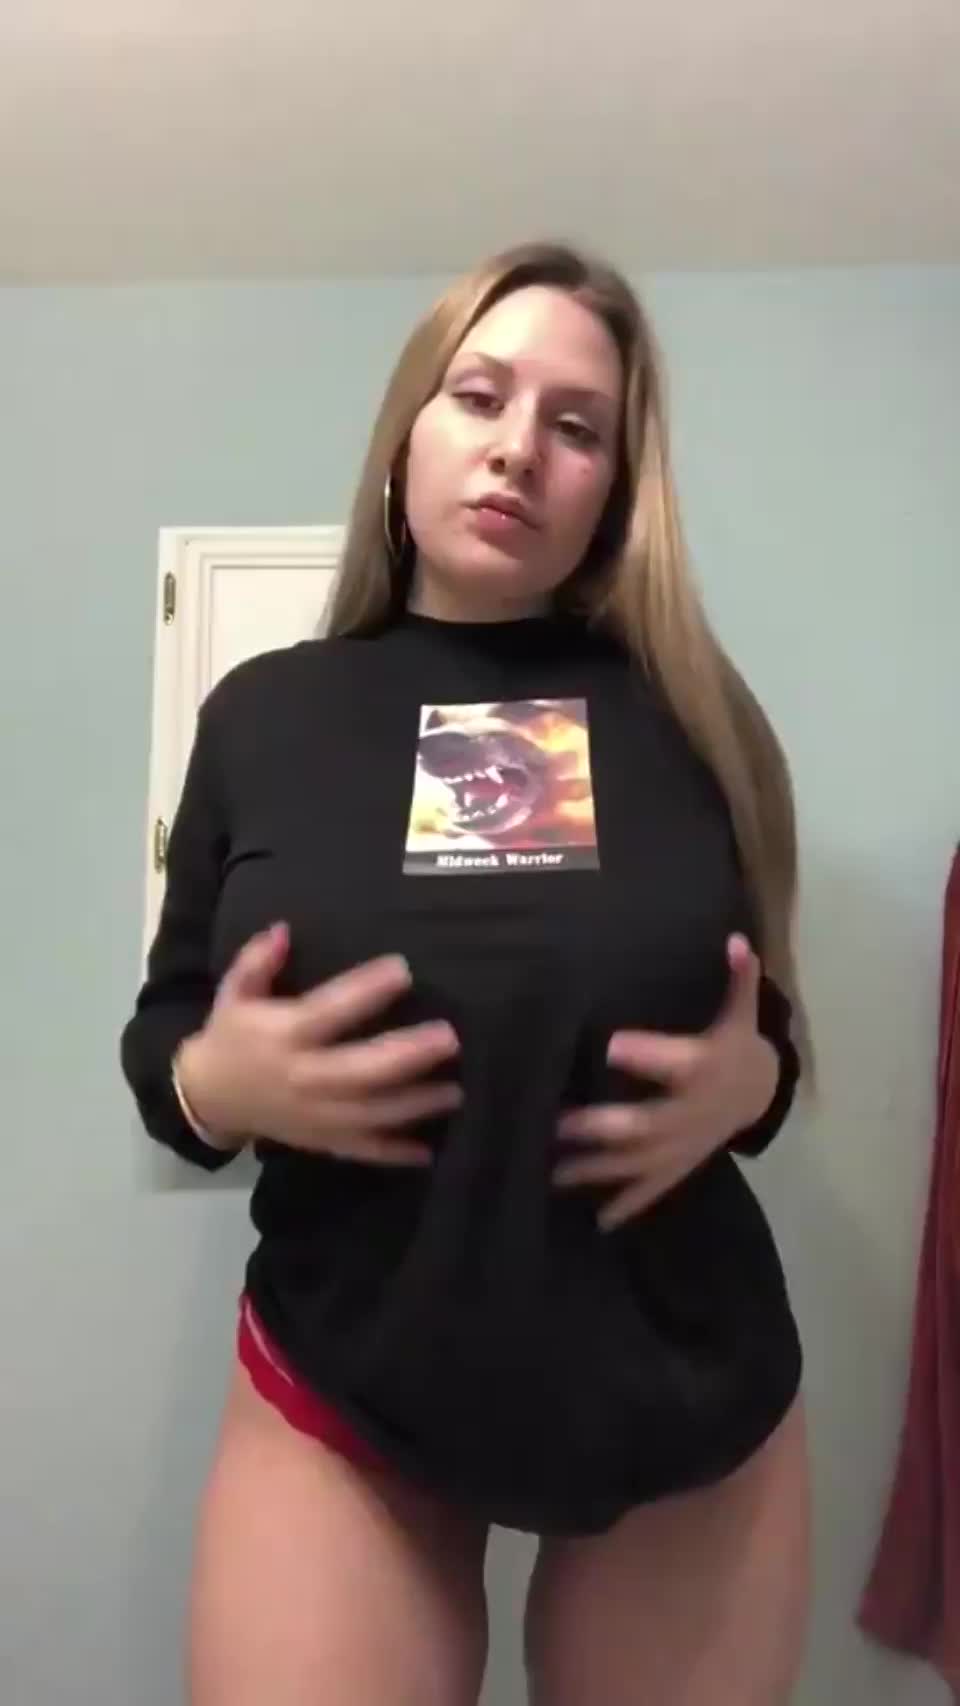 Early morning titty drop! : video clip